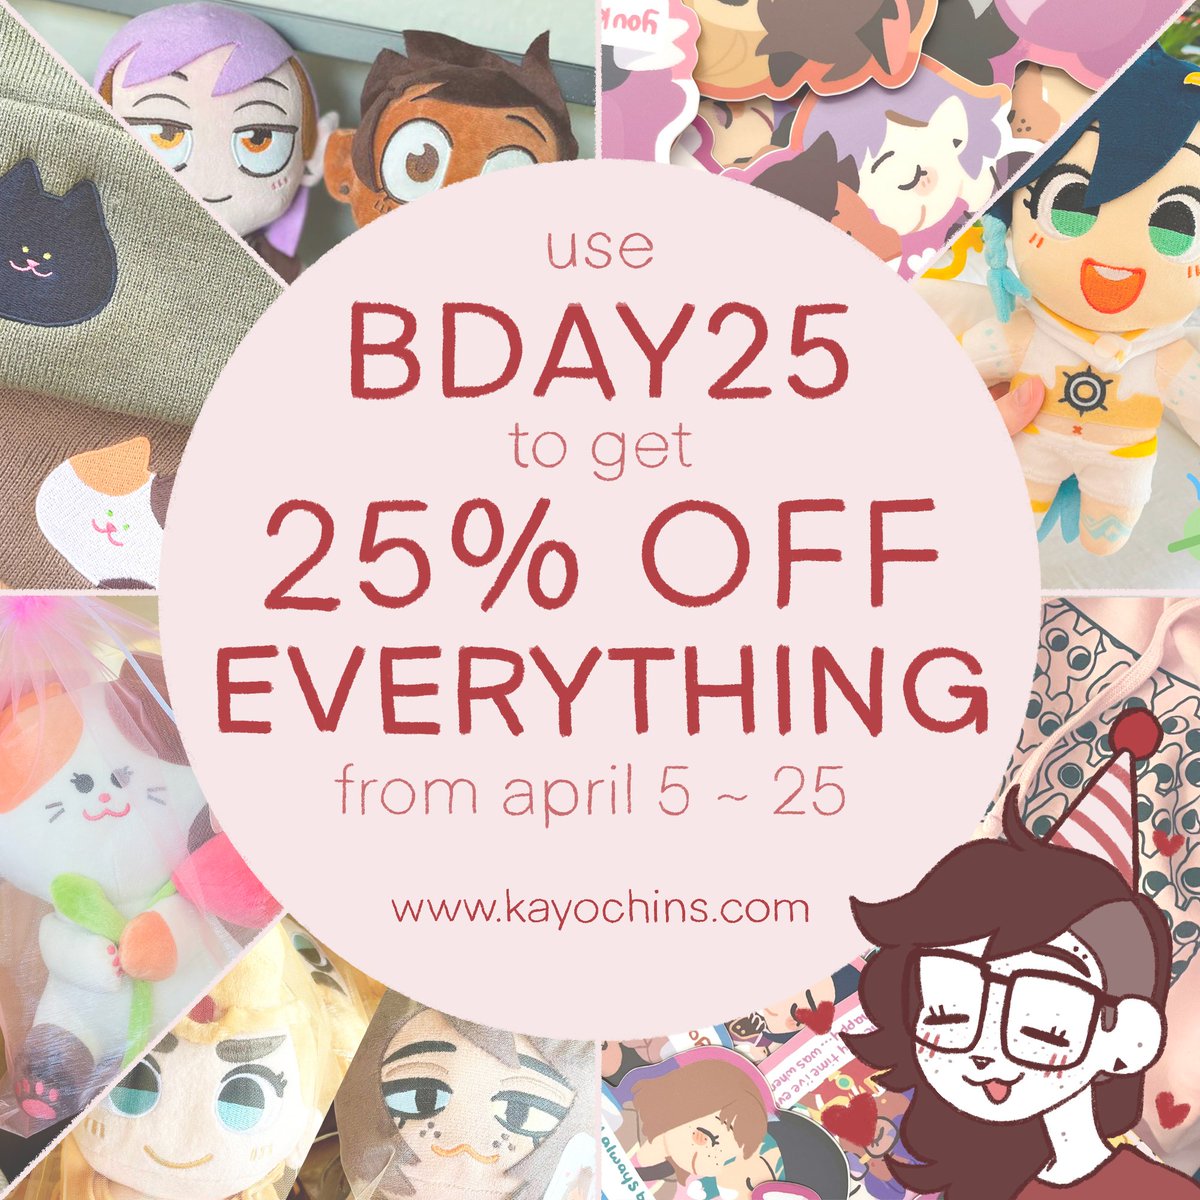 💗 BDAY SASA LELE IS LIVE! 💗 use code BDAY25 to get 25% off everything until april 25th! 🎂🎉 🔗 in bio 🎁